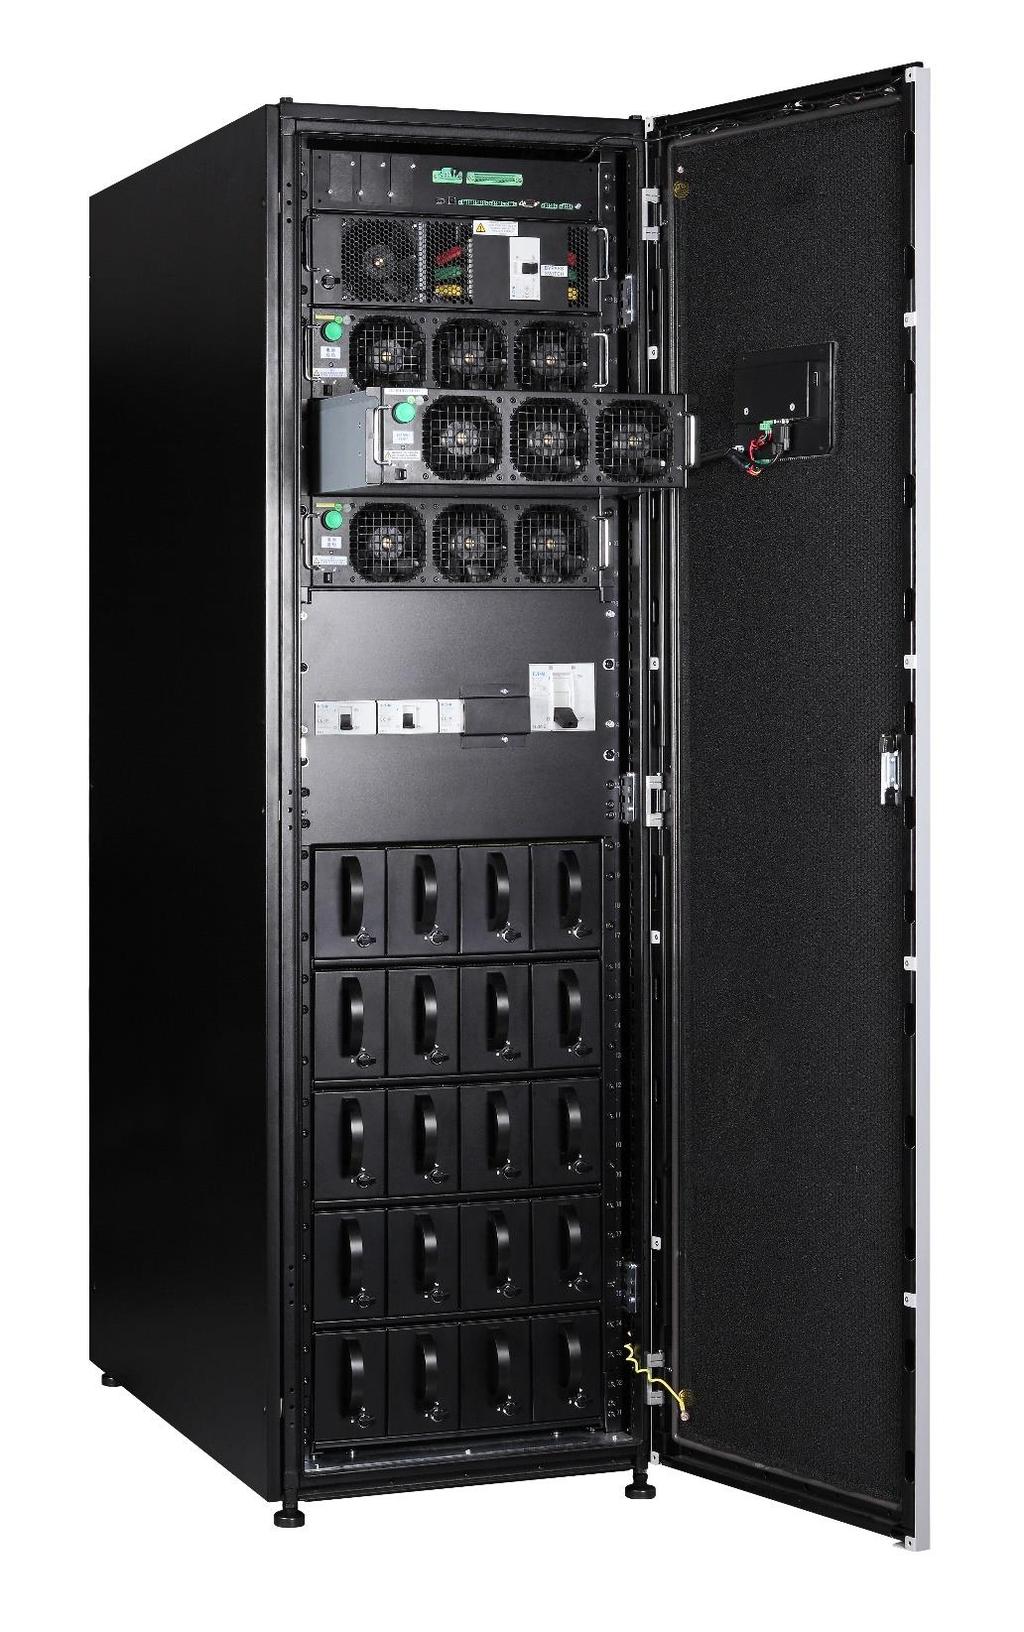 Maximum availability is integral to business continuity, and integral to the design of the Eaton 93PR UPS.